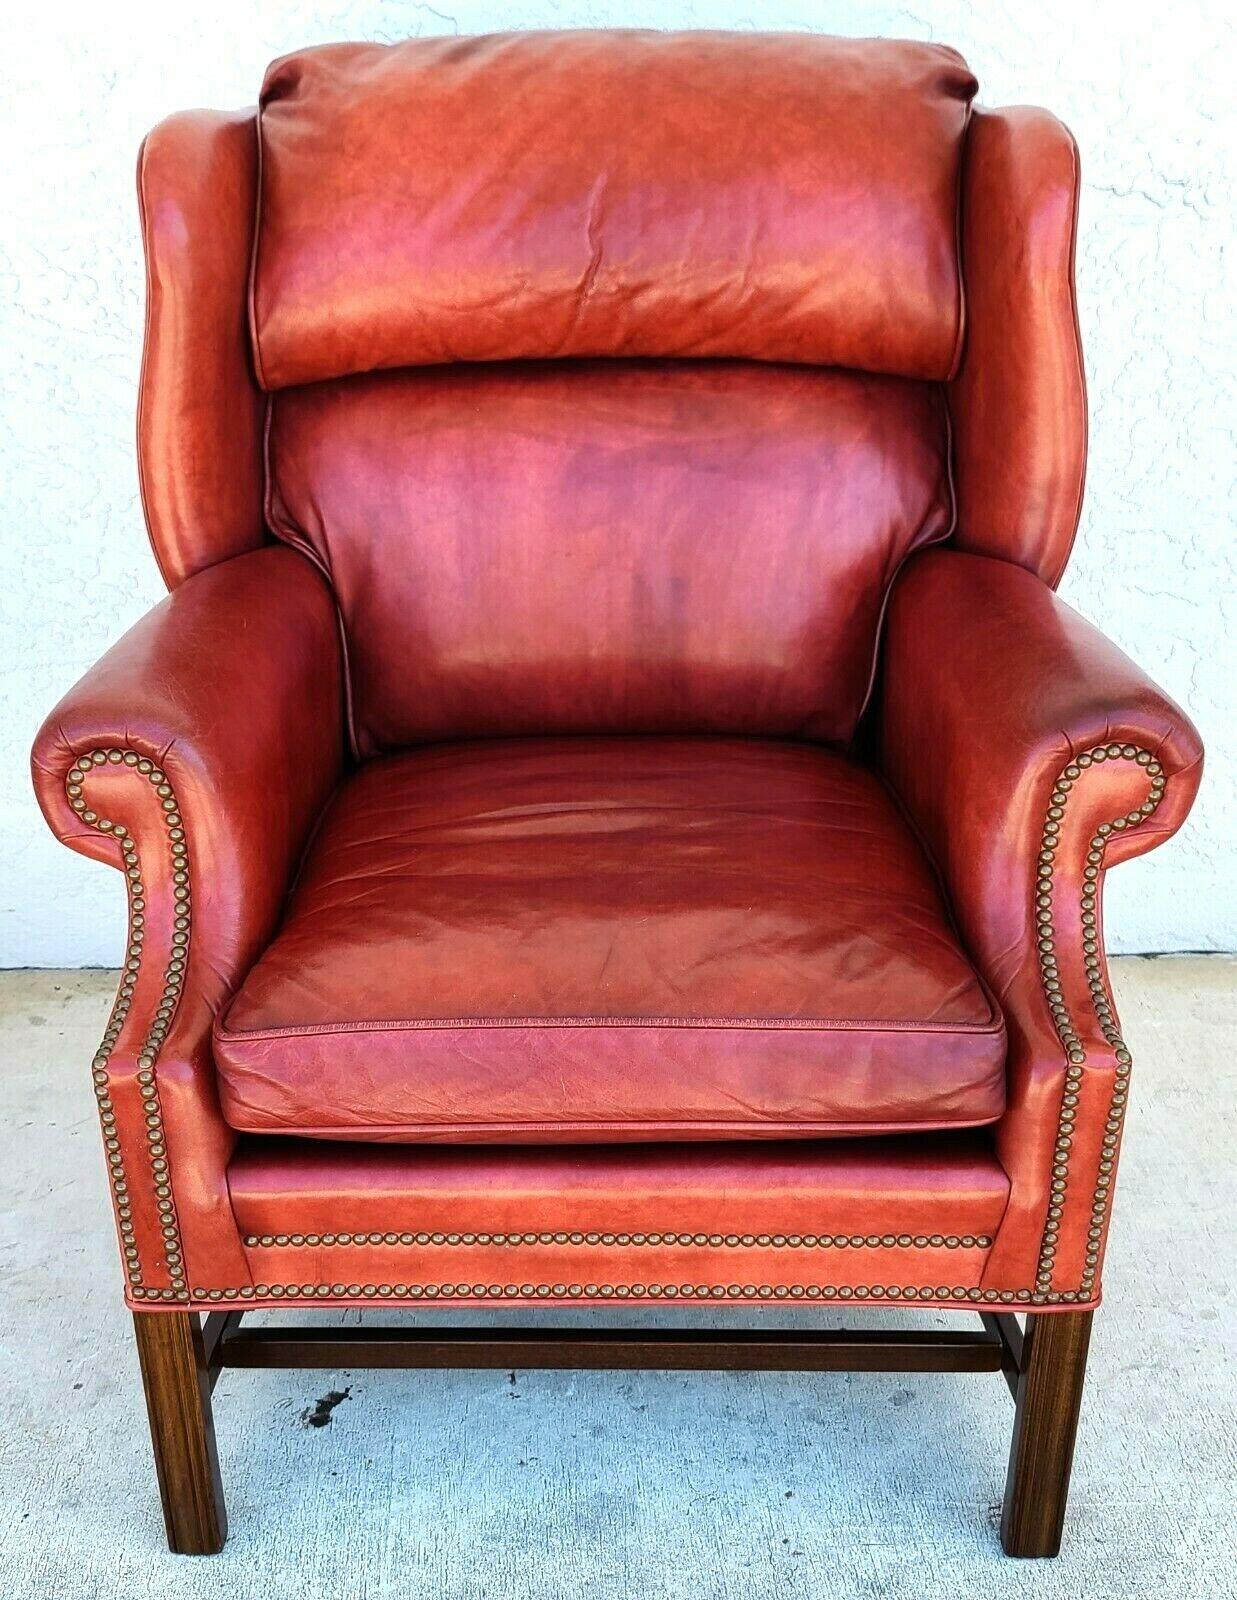 Chippendale Wingback Red Leather Library reading chair by Ethan Allen

Approximate Measurements in Inches
42.5